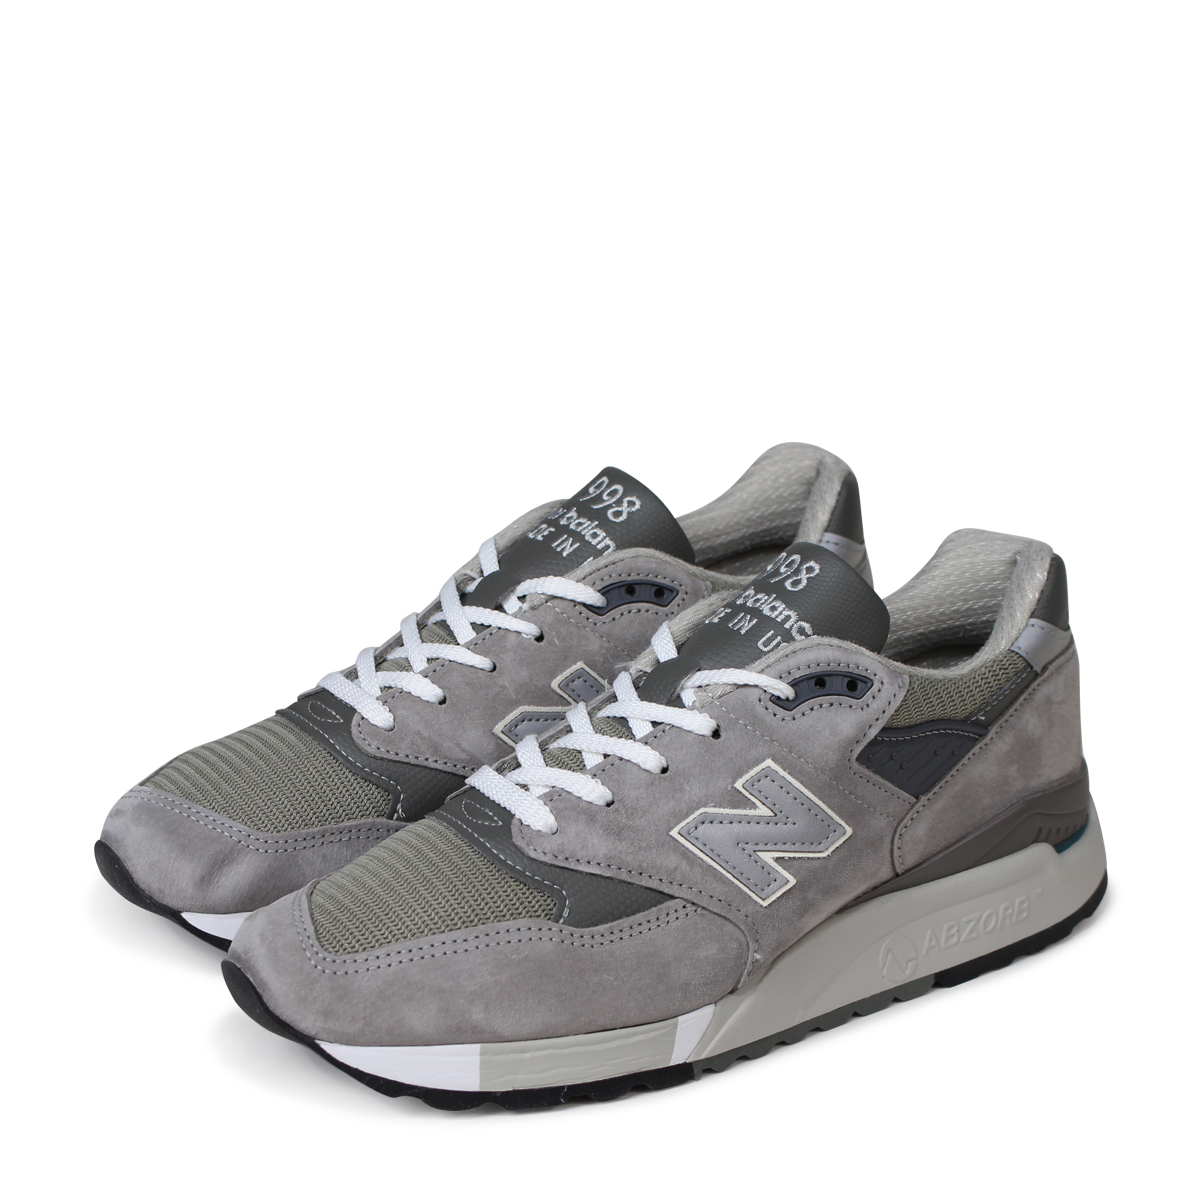 new balance sneakers made in usa